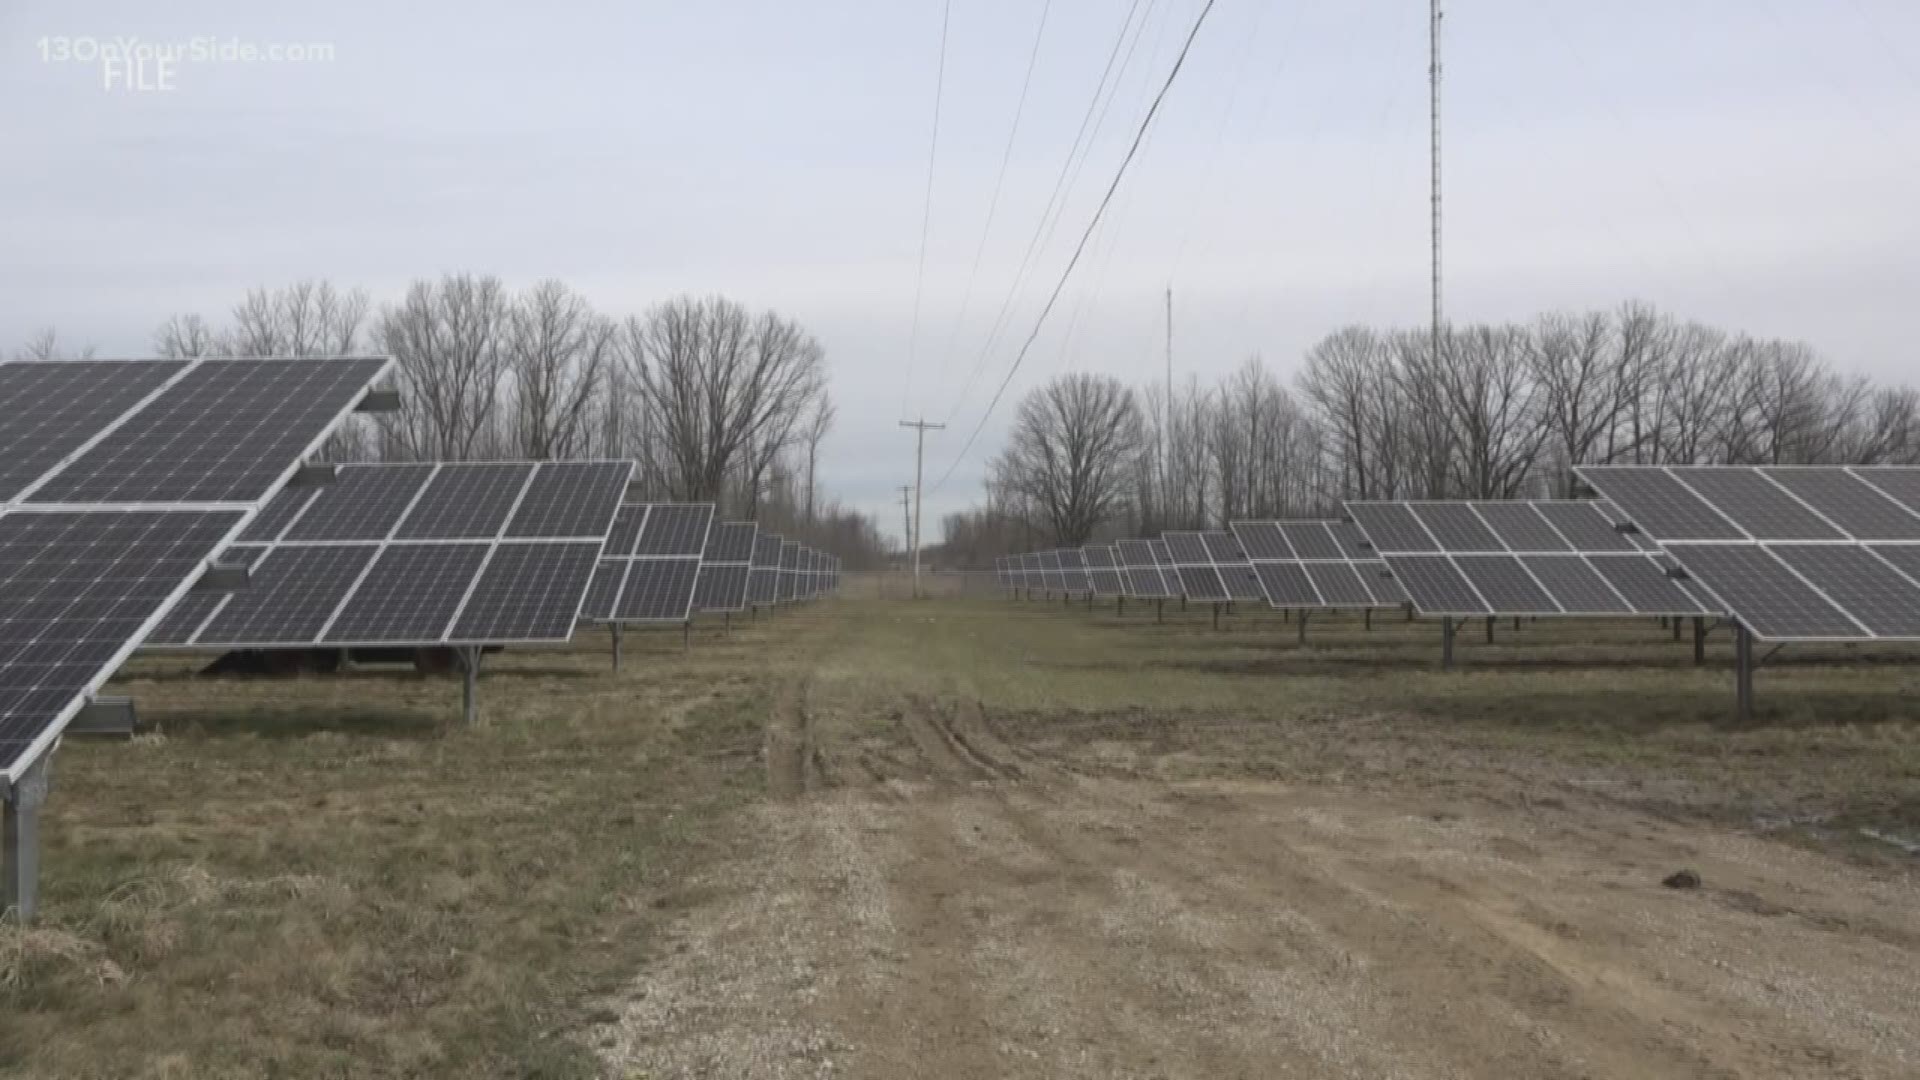 Grand Rapids is exploring the potential for solar installations at seven city-owned sites, as well as reviving a failed solar attempt at Butterworth Landfill in its ambitious goal to offset 100% of electricity consumed with renewable sources over the next six years.